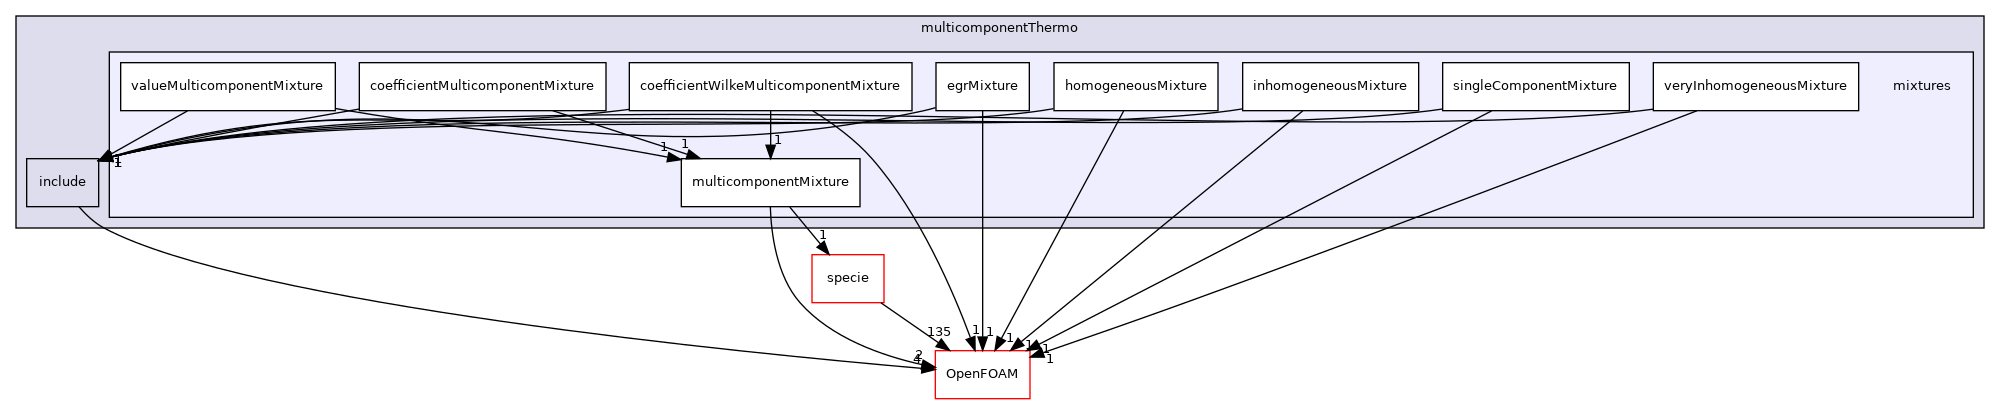 src/thermophysicalModels/multicomponentThermo/mixtures